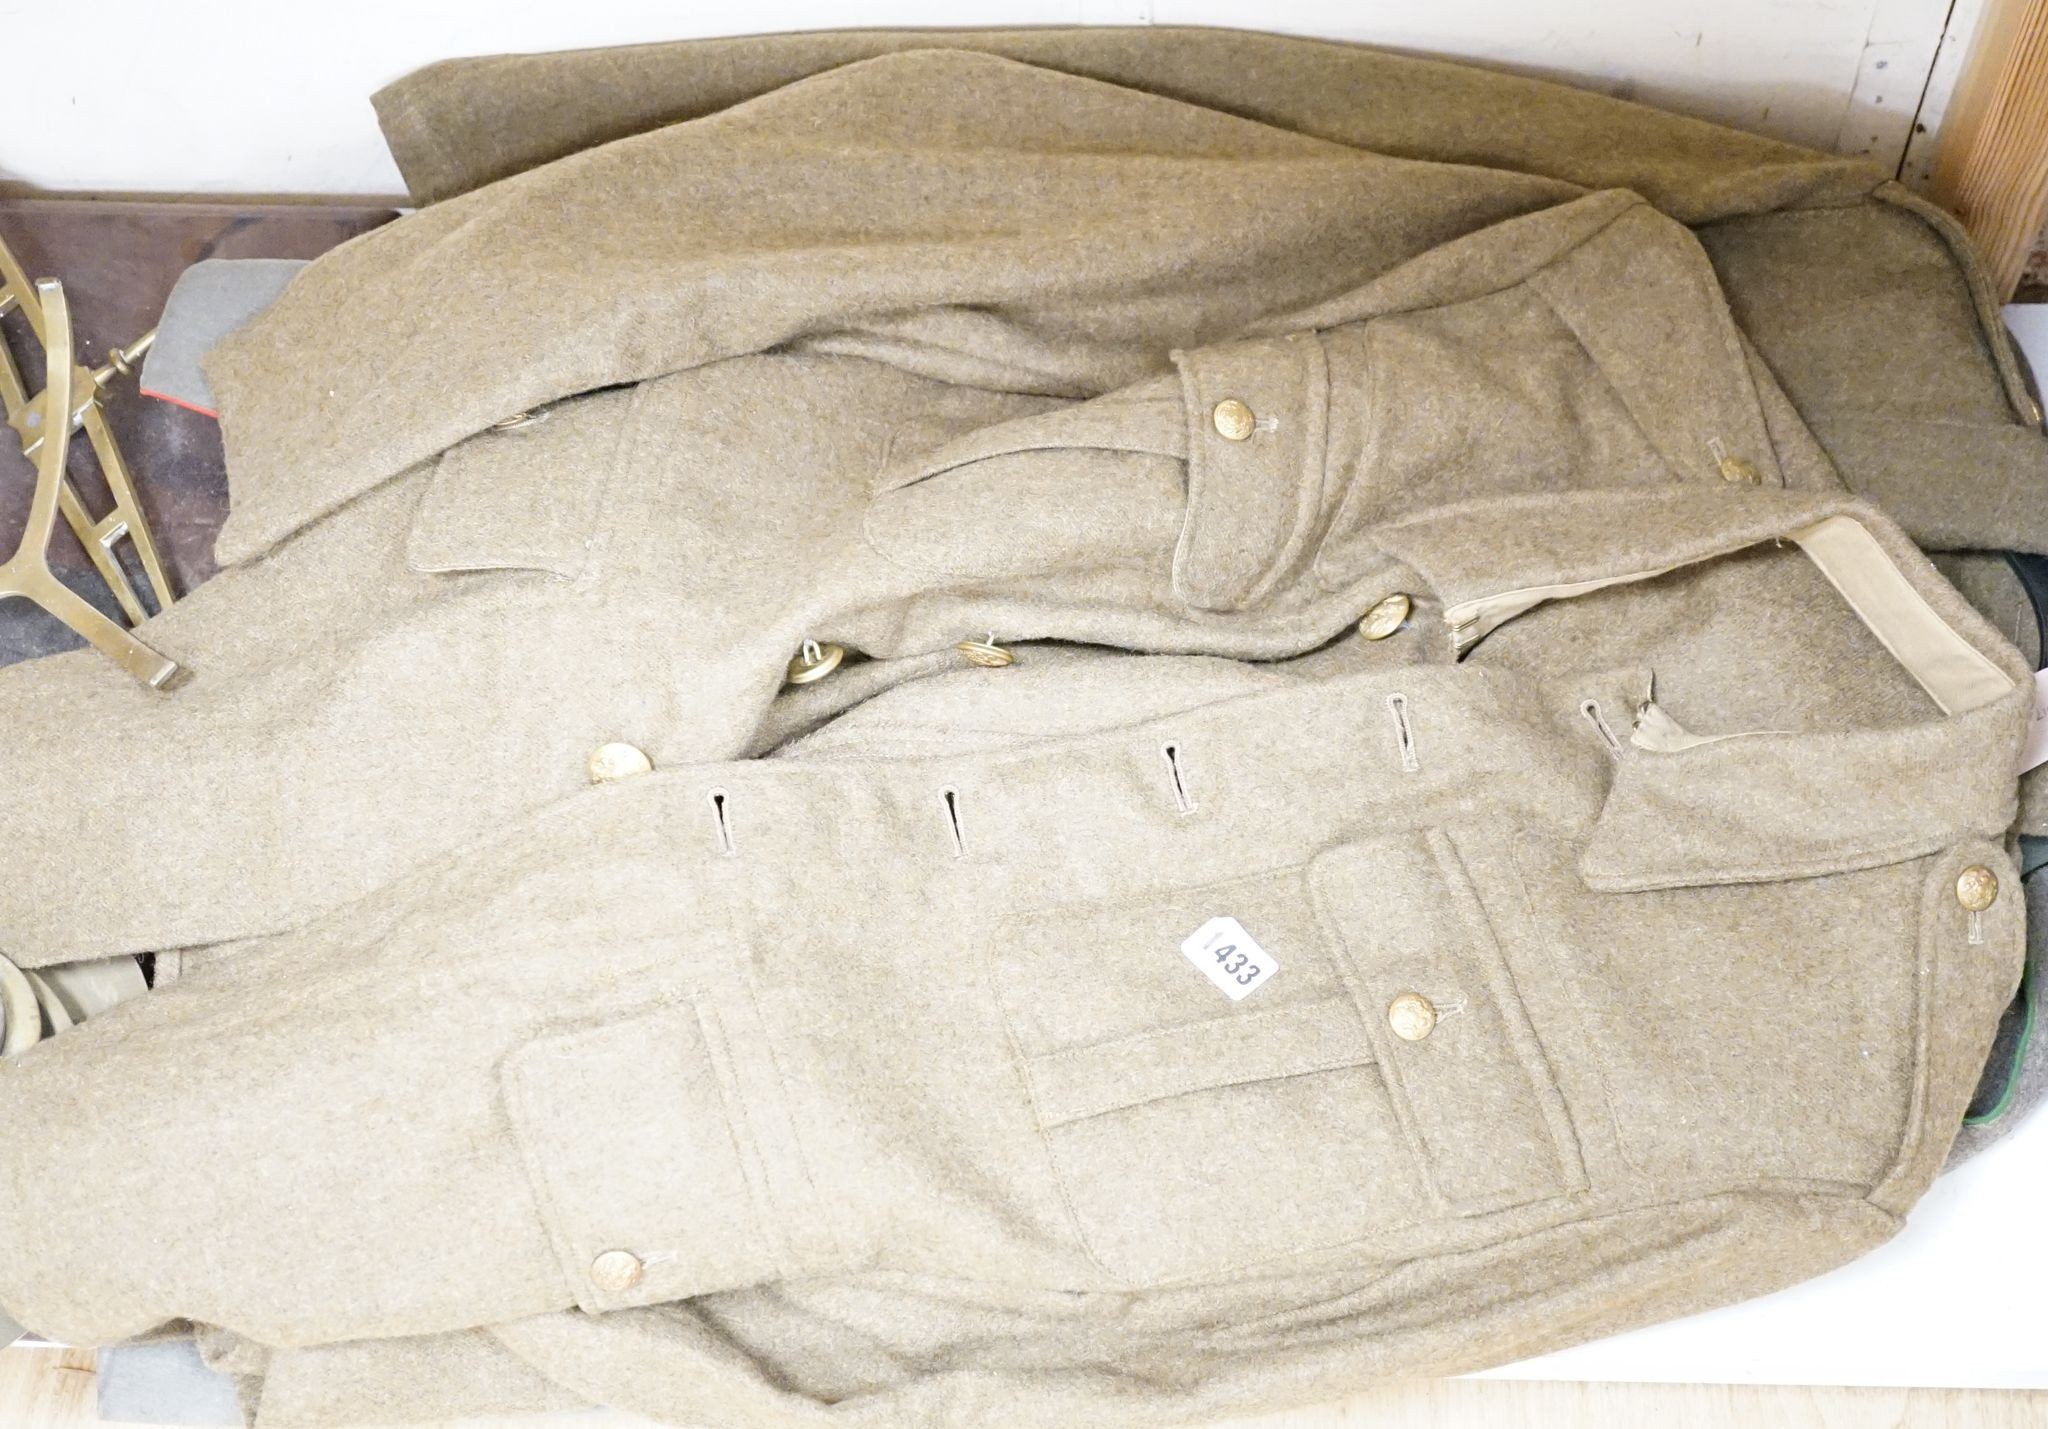 Two German WWI jackets and a similar British jacket.